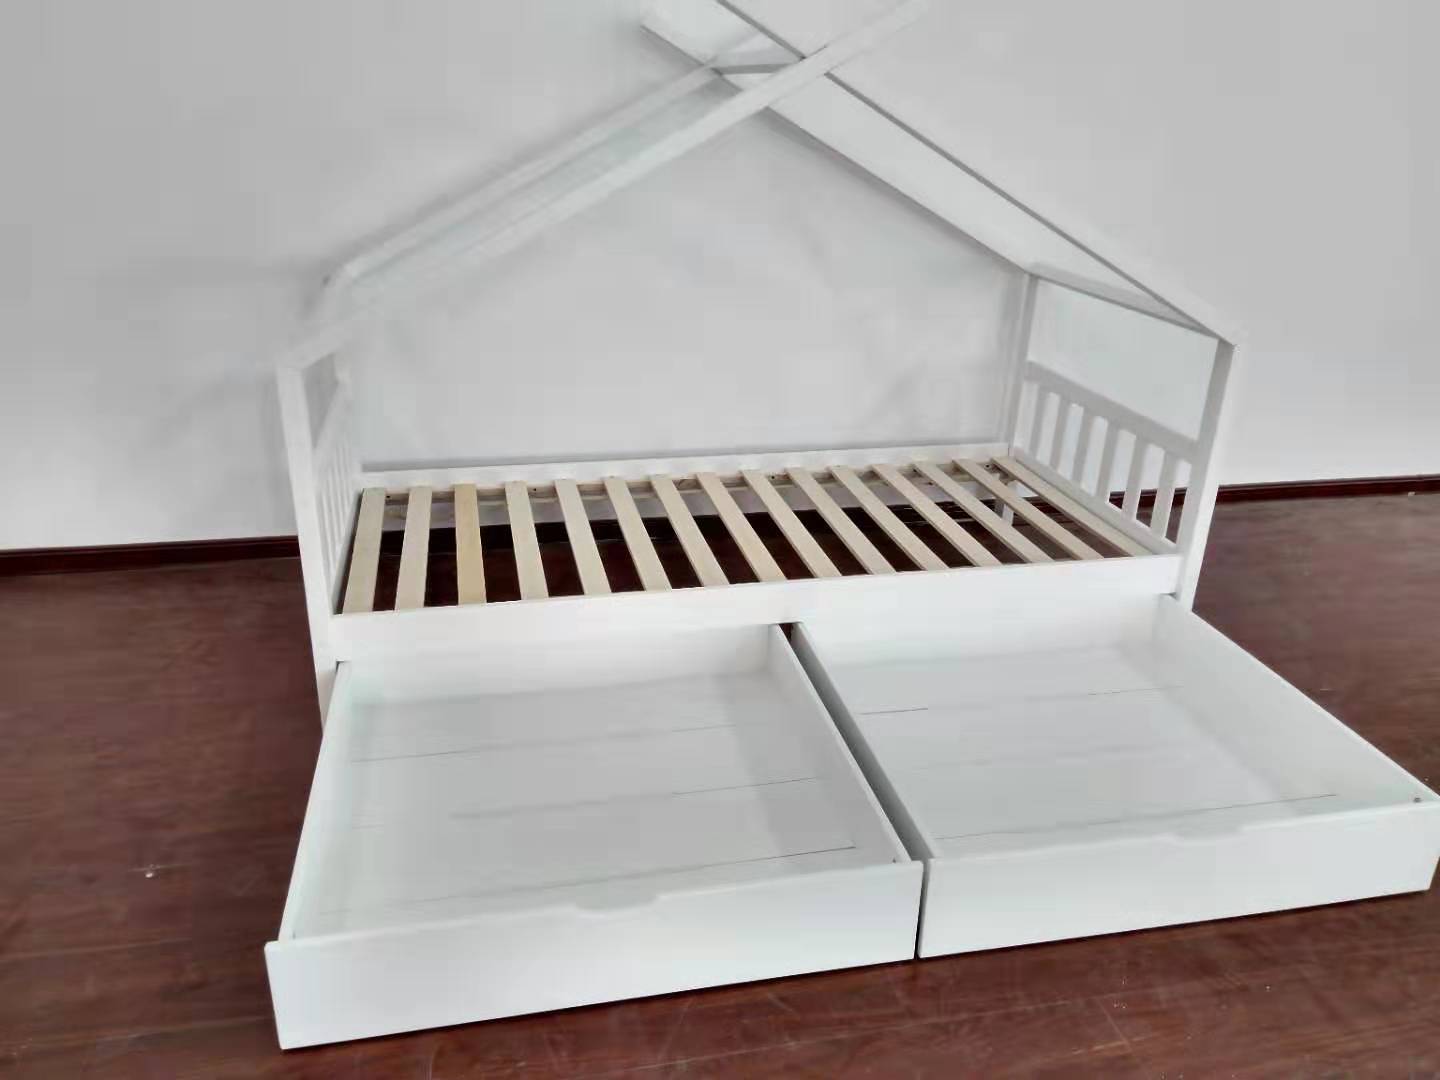 Kid White House Bed with Drawer